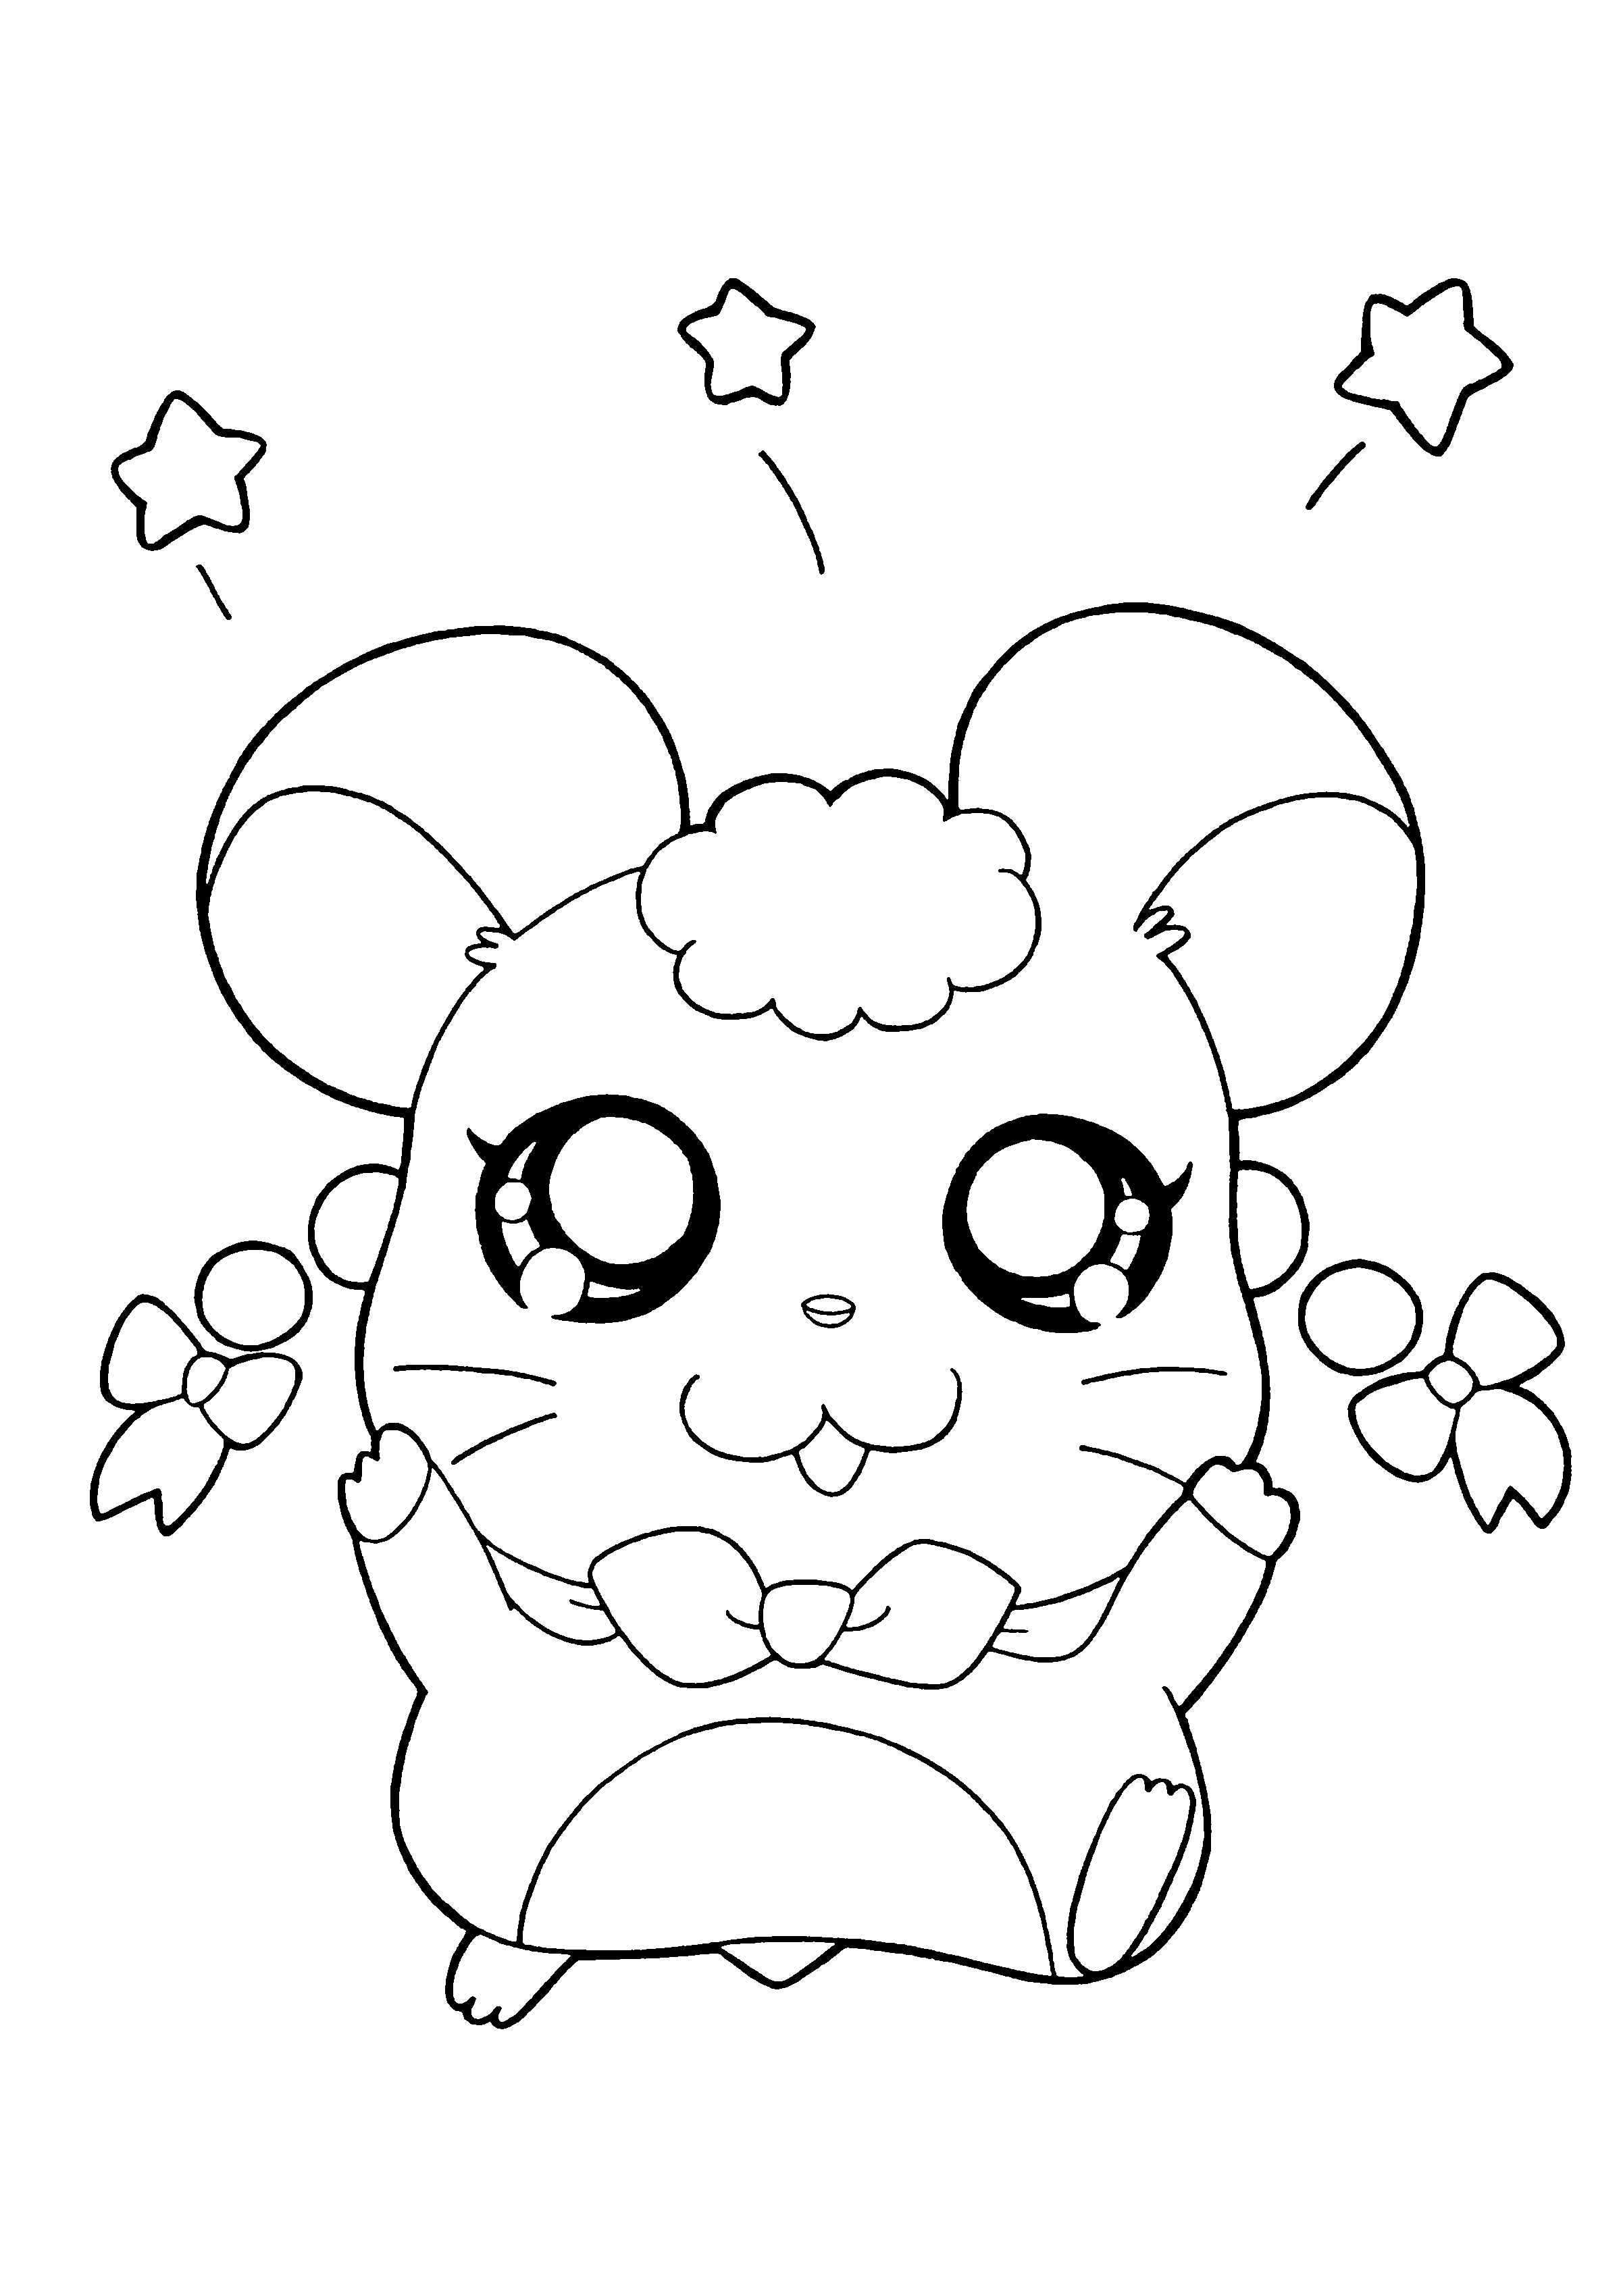 Coloring Page Hamtaro Coloring Pages 147 Puppy Coloring Pages Animal Coloring Pages C